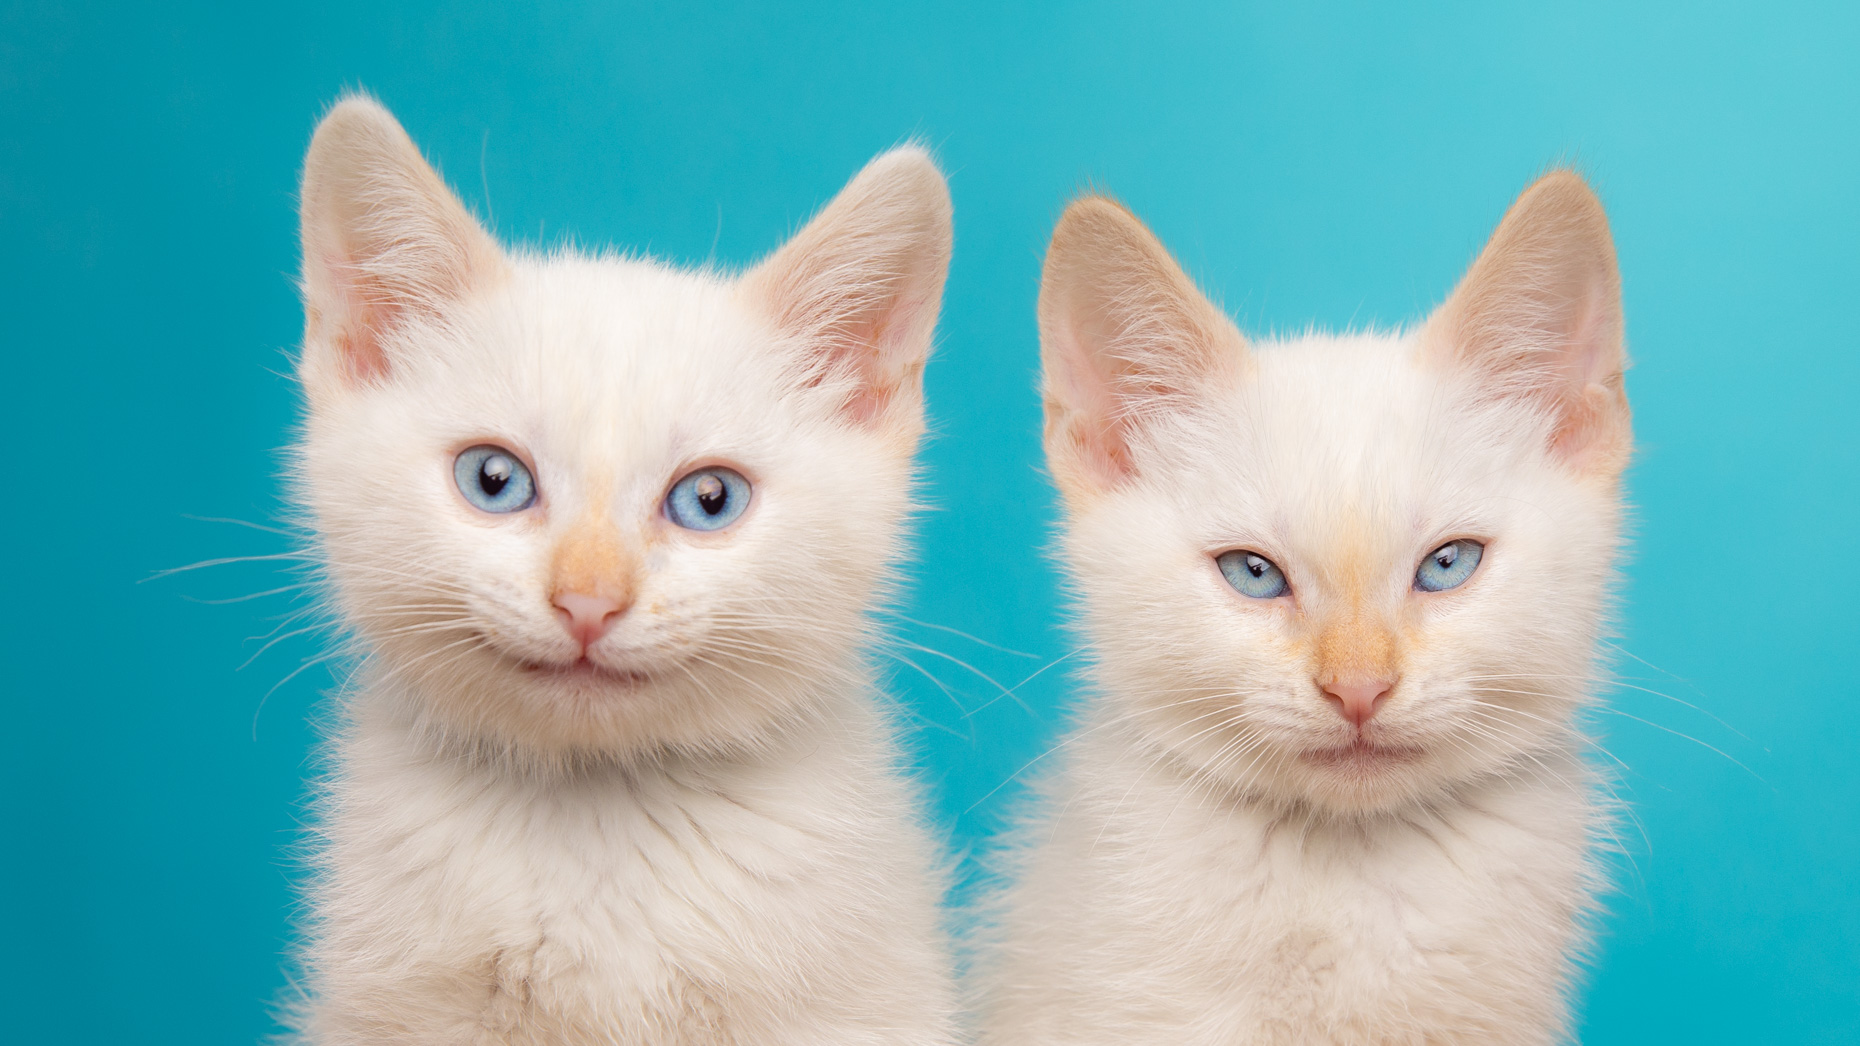 white kittens against a blue background